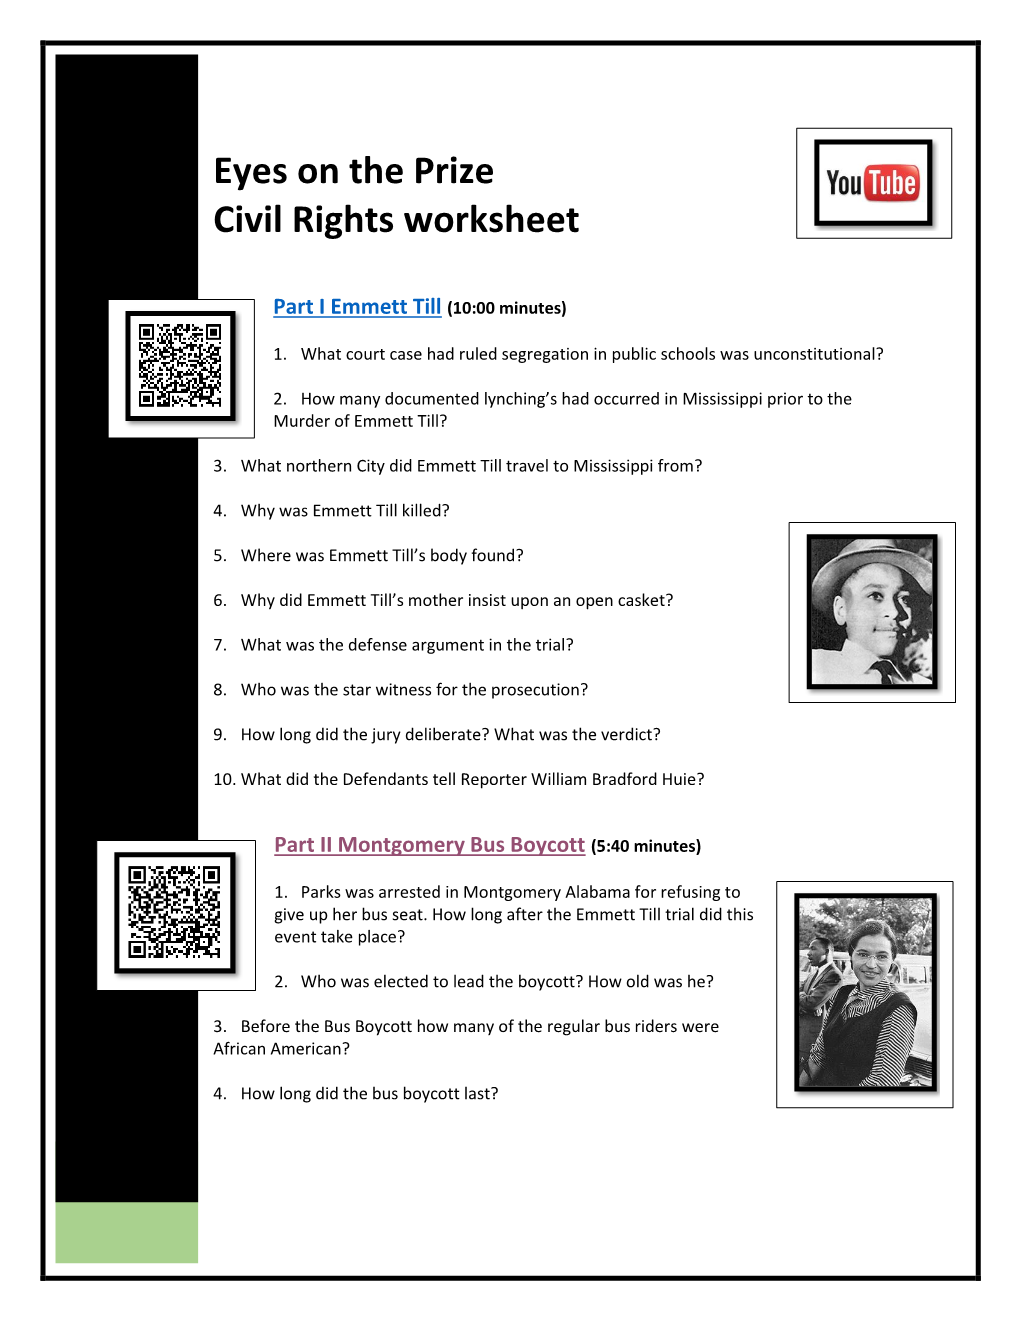 Eyes on the Prize Civil Rights Worksheet